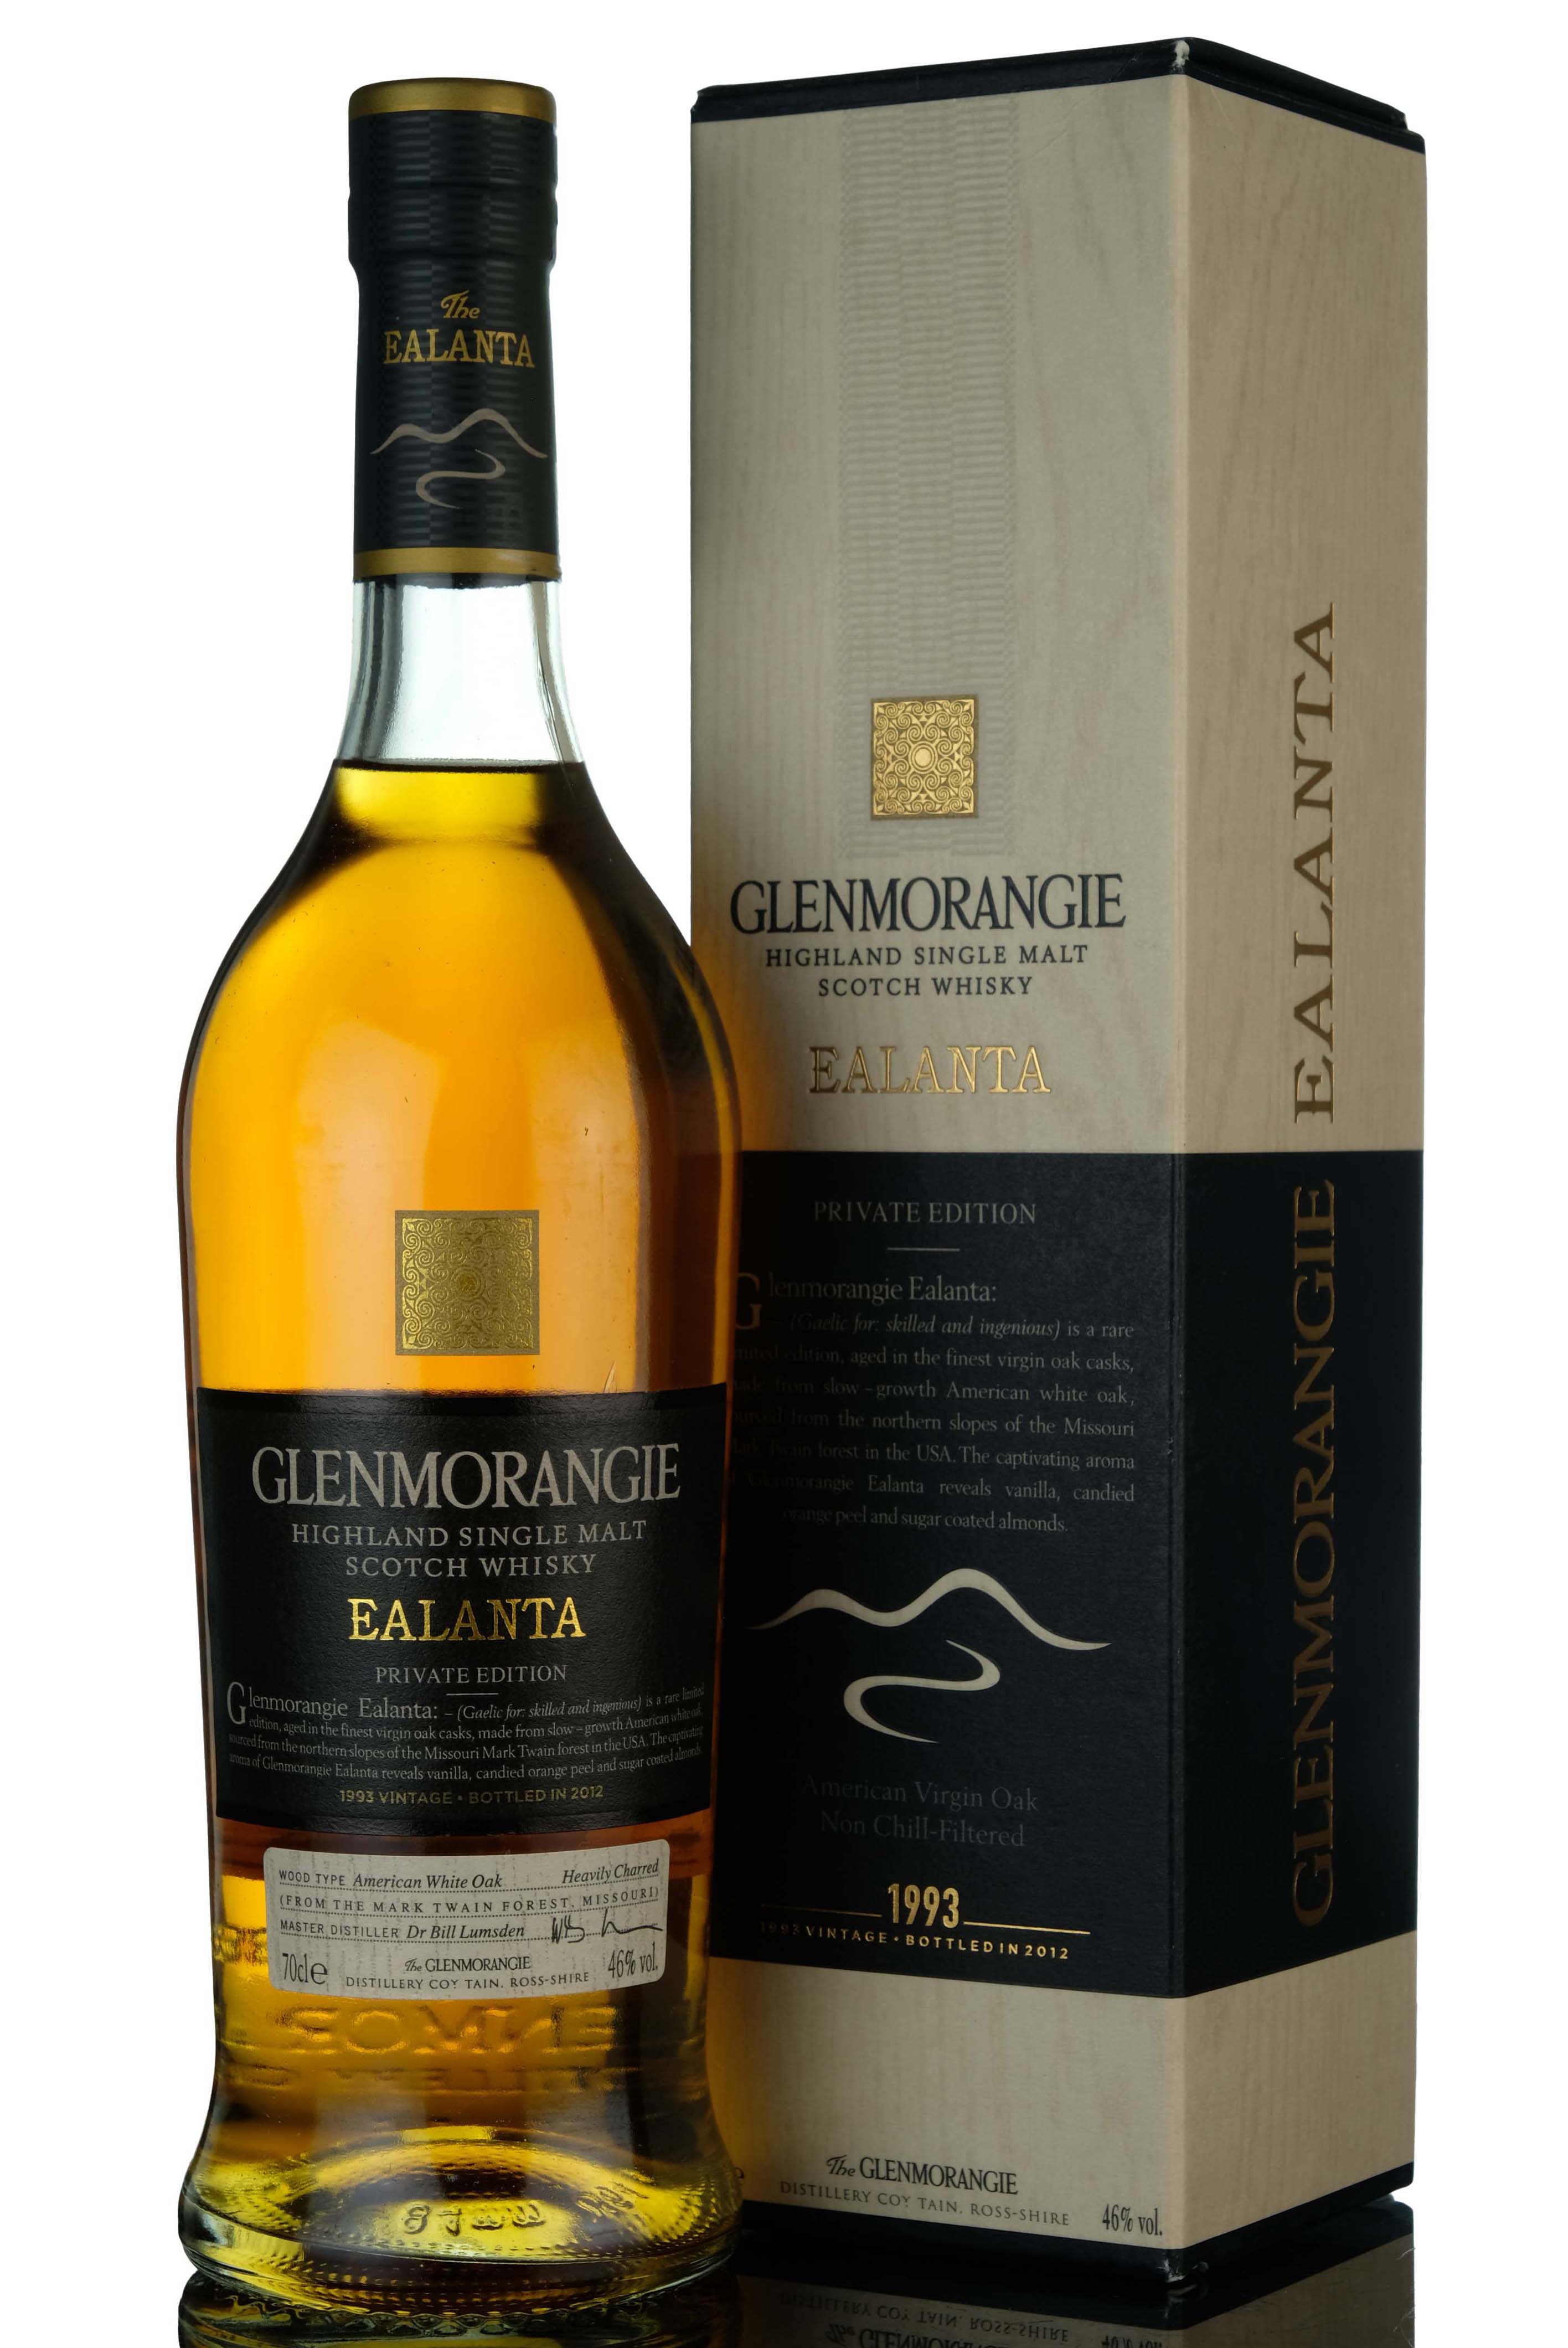 Glenmorangie 1993-2012 - 19 Year Old - Private Edition The Ealanta - 4th release